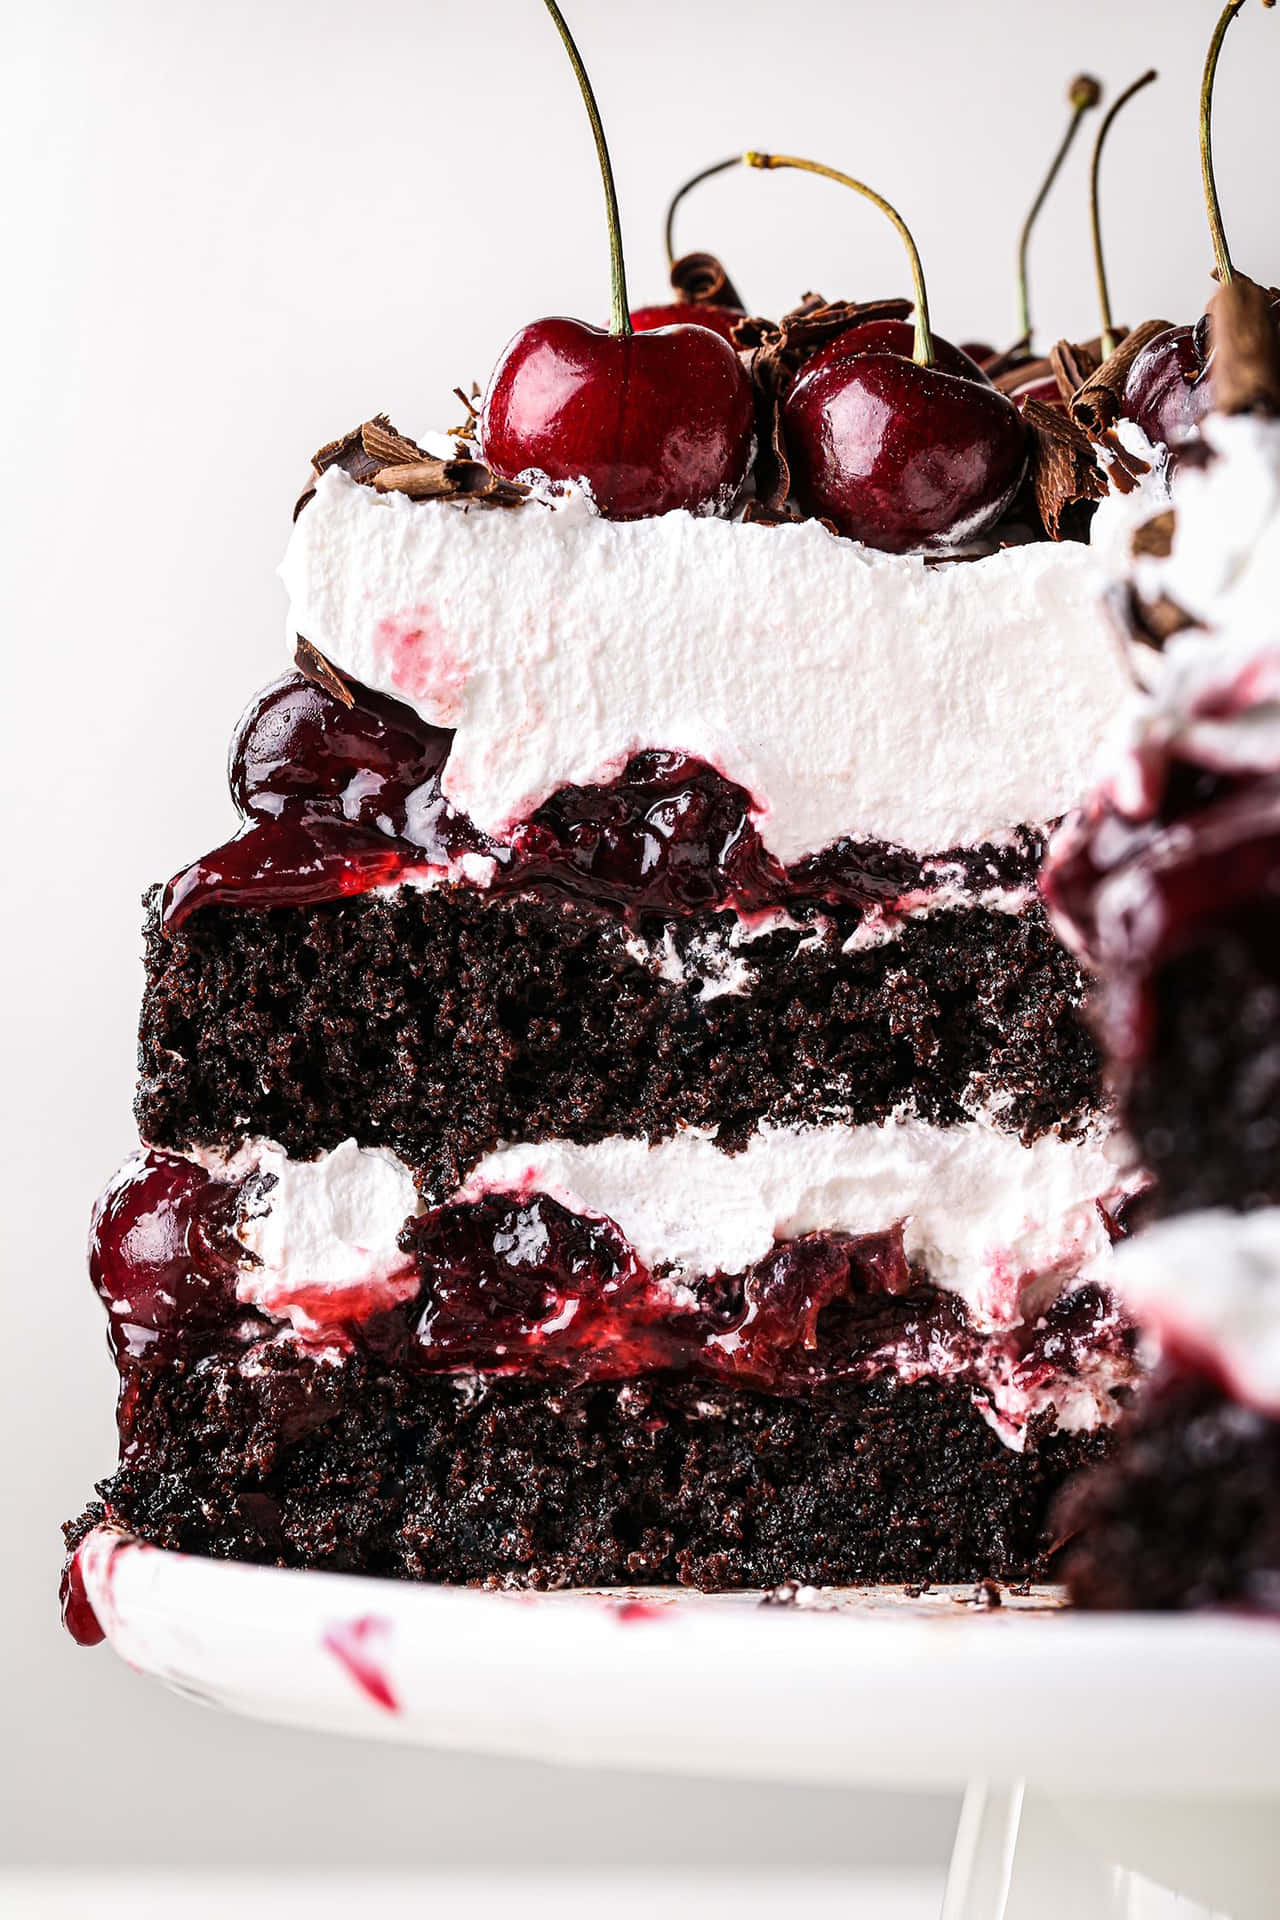 A classic Black Forest Cake - traditional and delicious Wallpaper